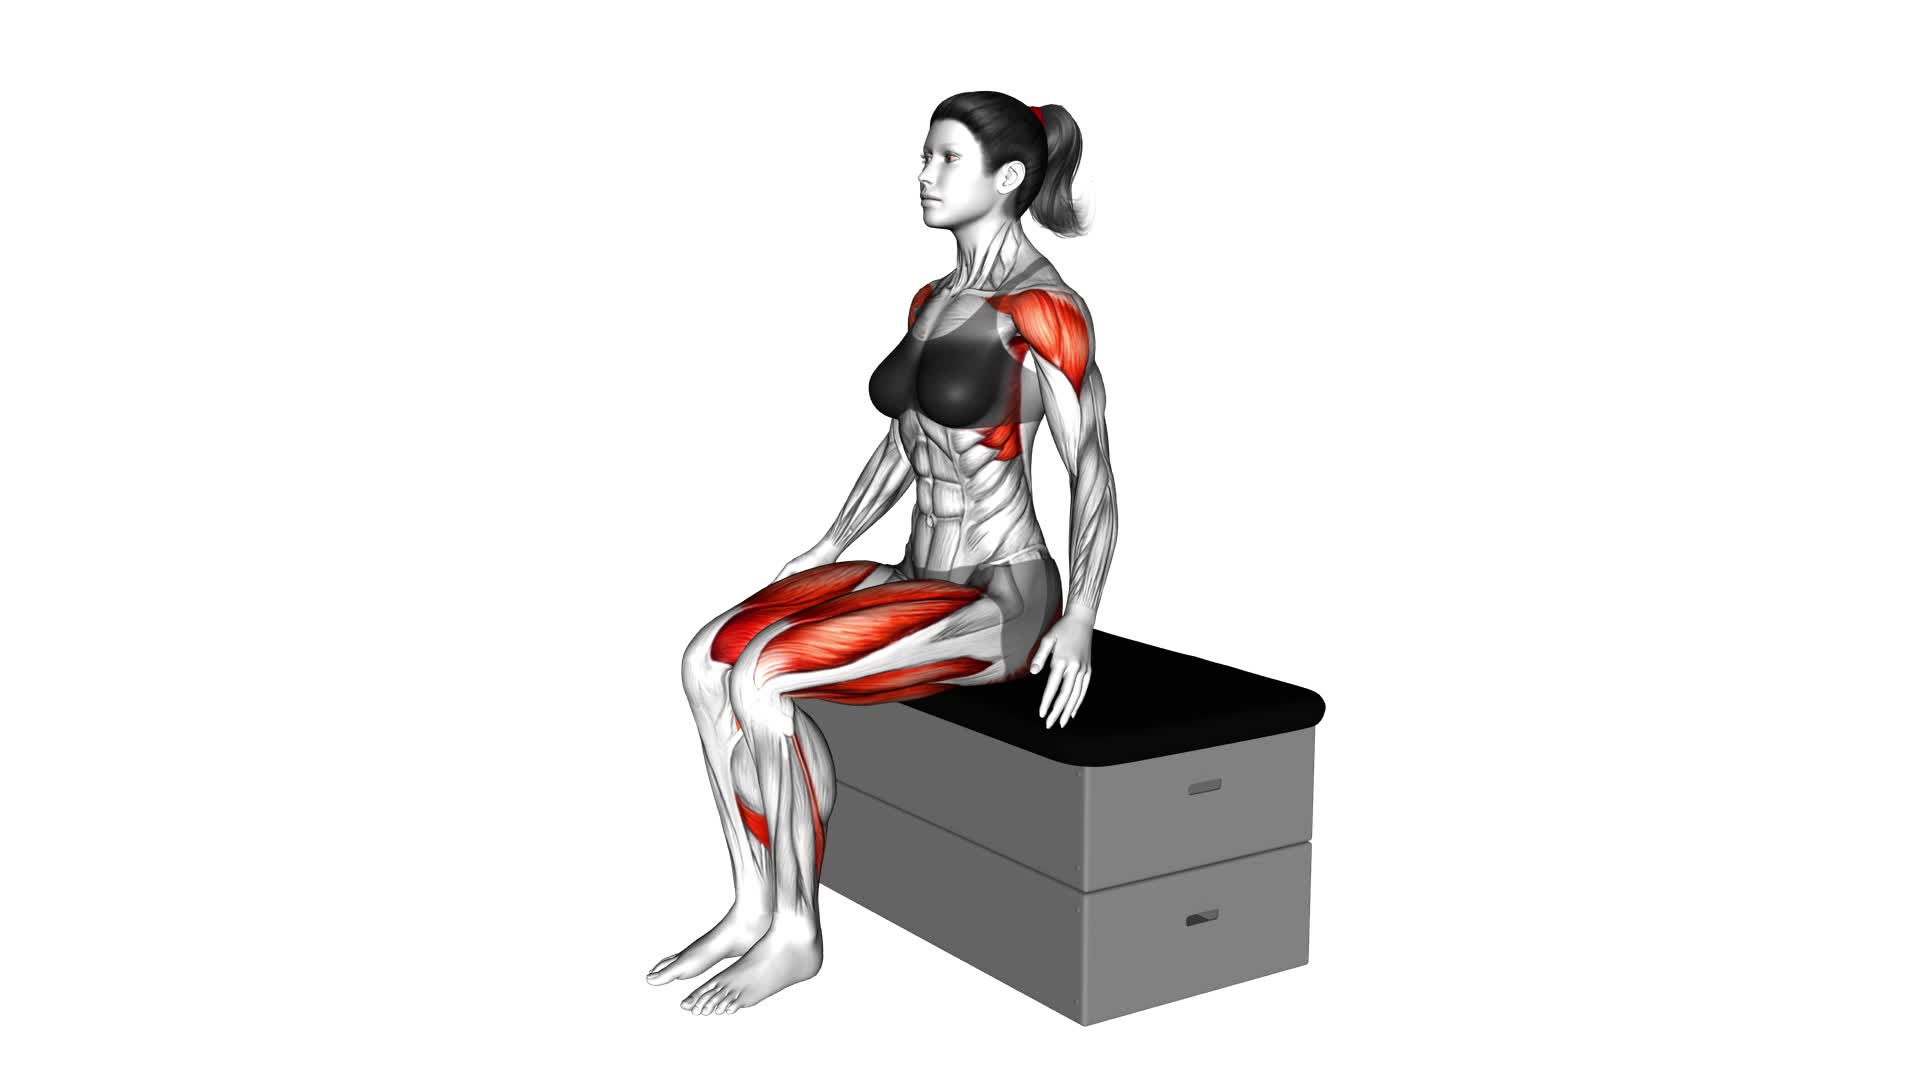 Sitting Lateral Raise Stepout on a Padded Stool (Female) - Video Exercise Guide & Tips